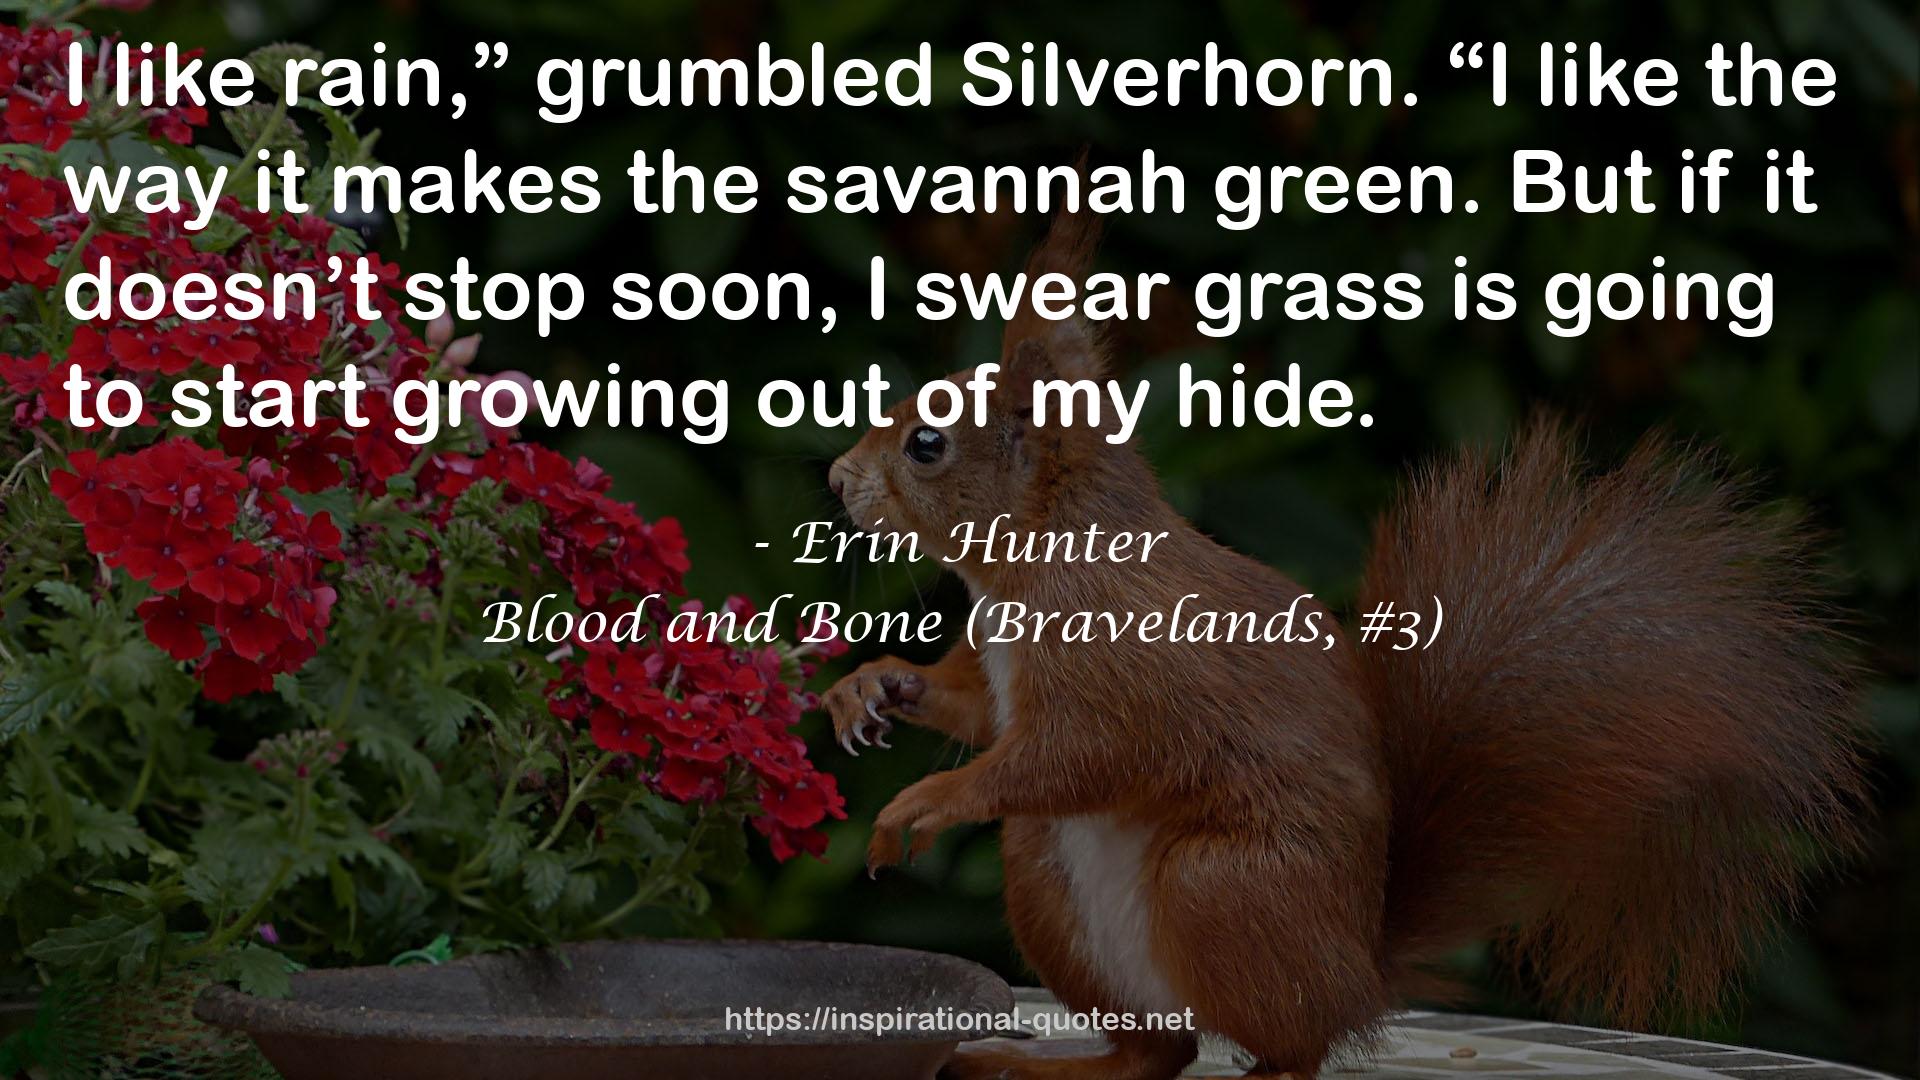 Blood and Bone (Bravelands, #3) QUOTES